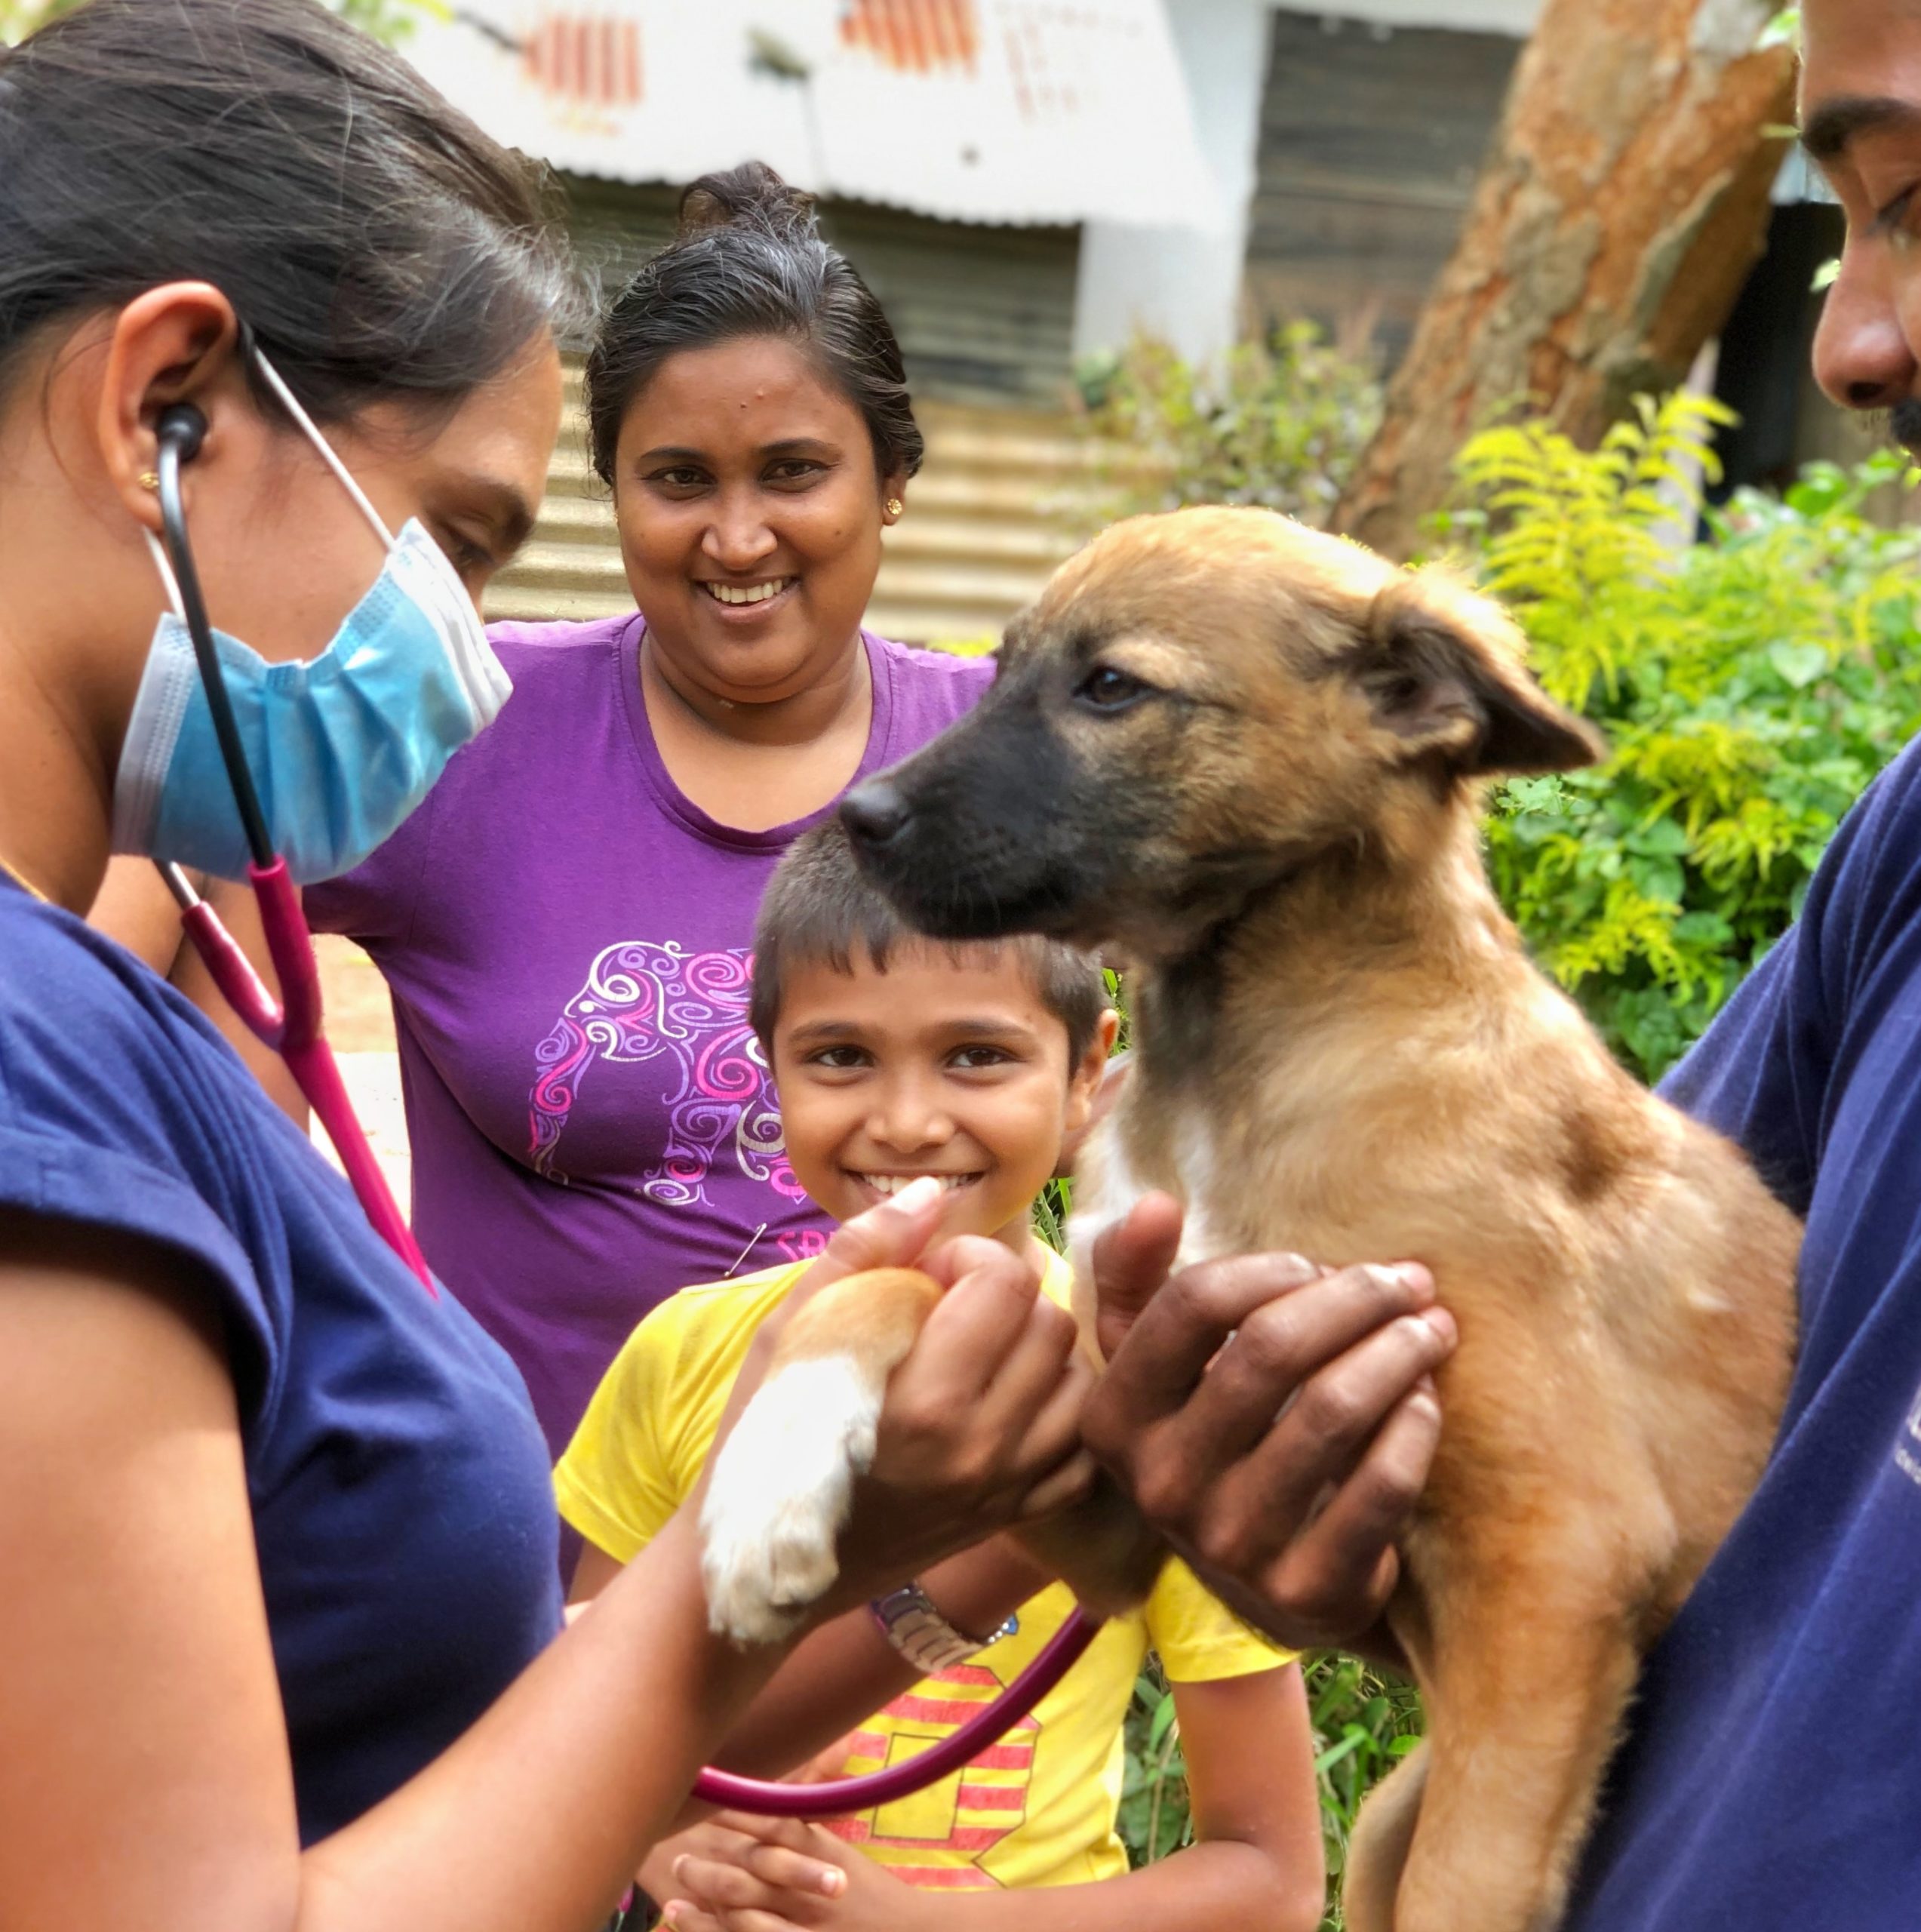 The World’s First Dog Health Workers Ready to Eliminate Rabies